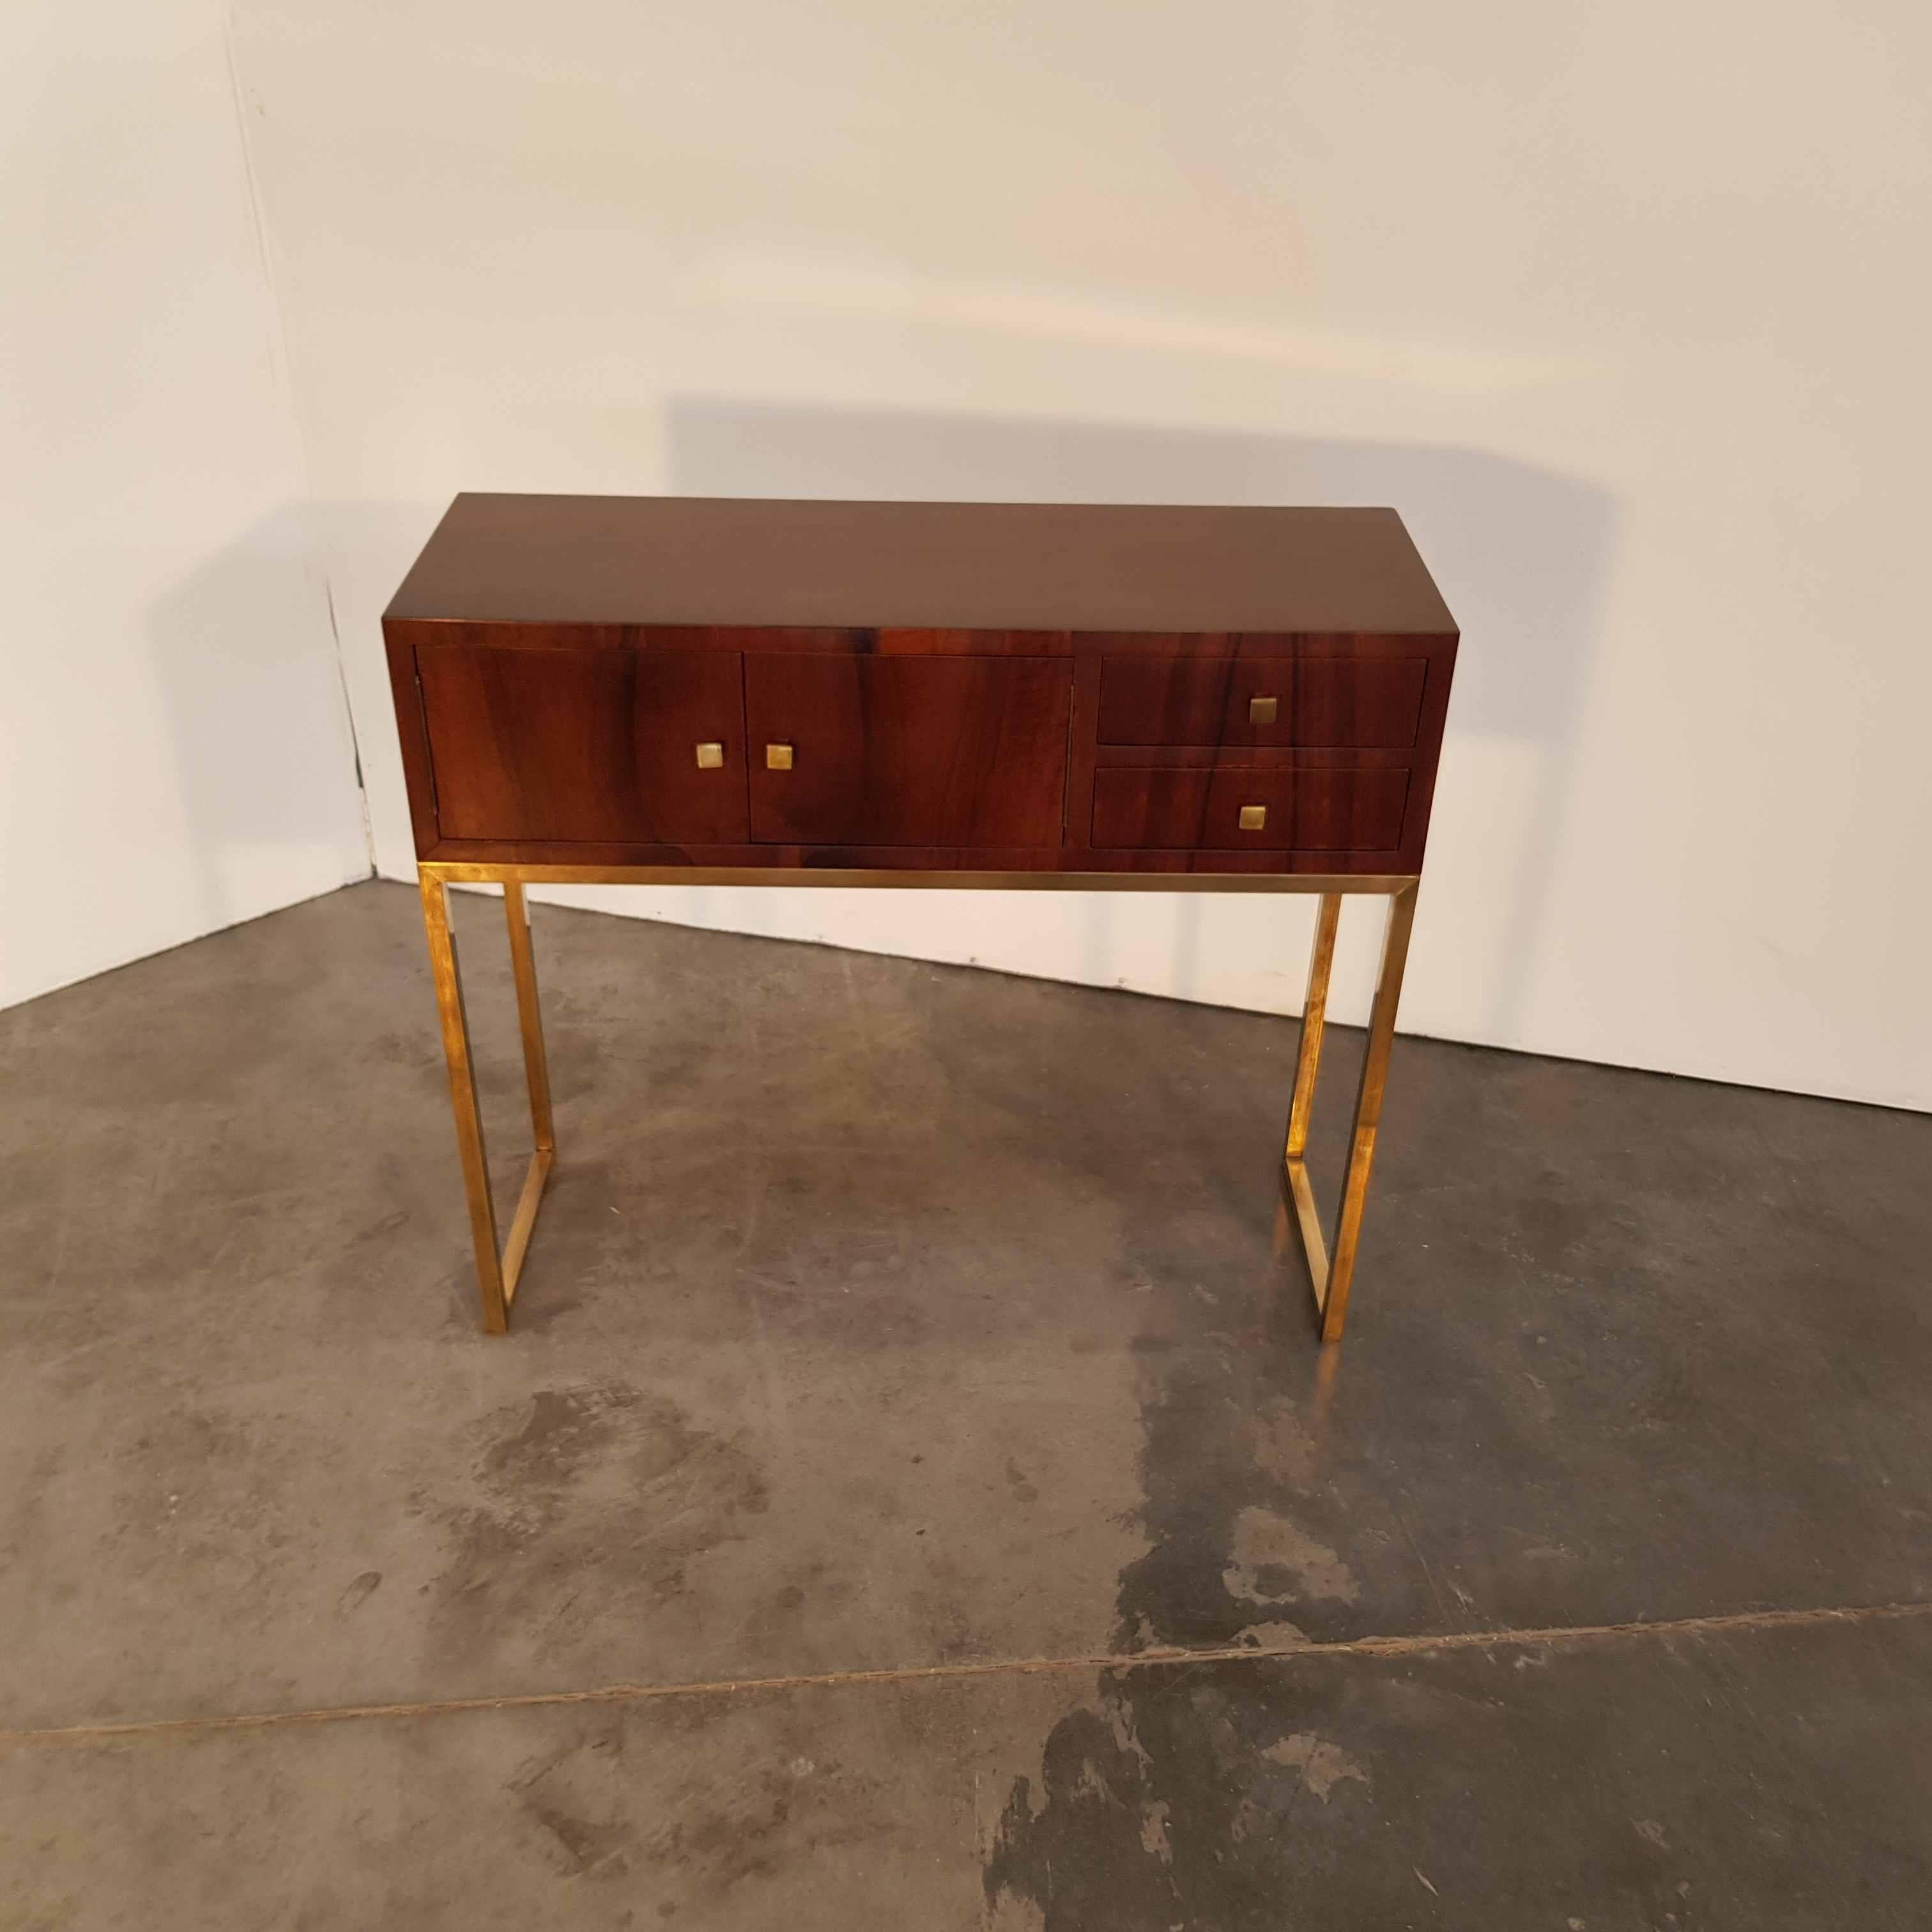 Elegant Bauhaus console on polished brass legs with hand-polished walnut veneer.
From Hungary, 1920s.
Recently restored.